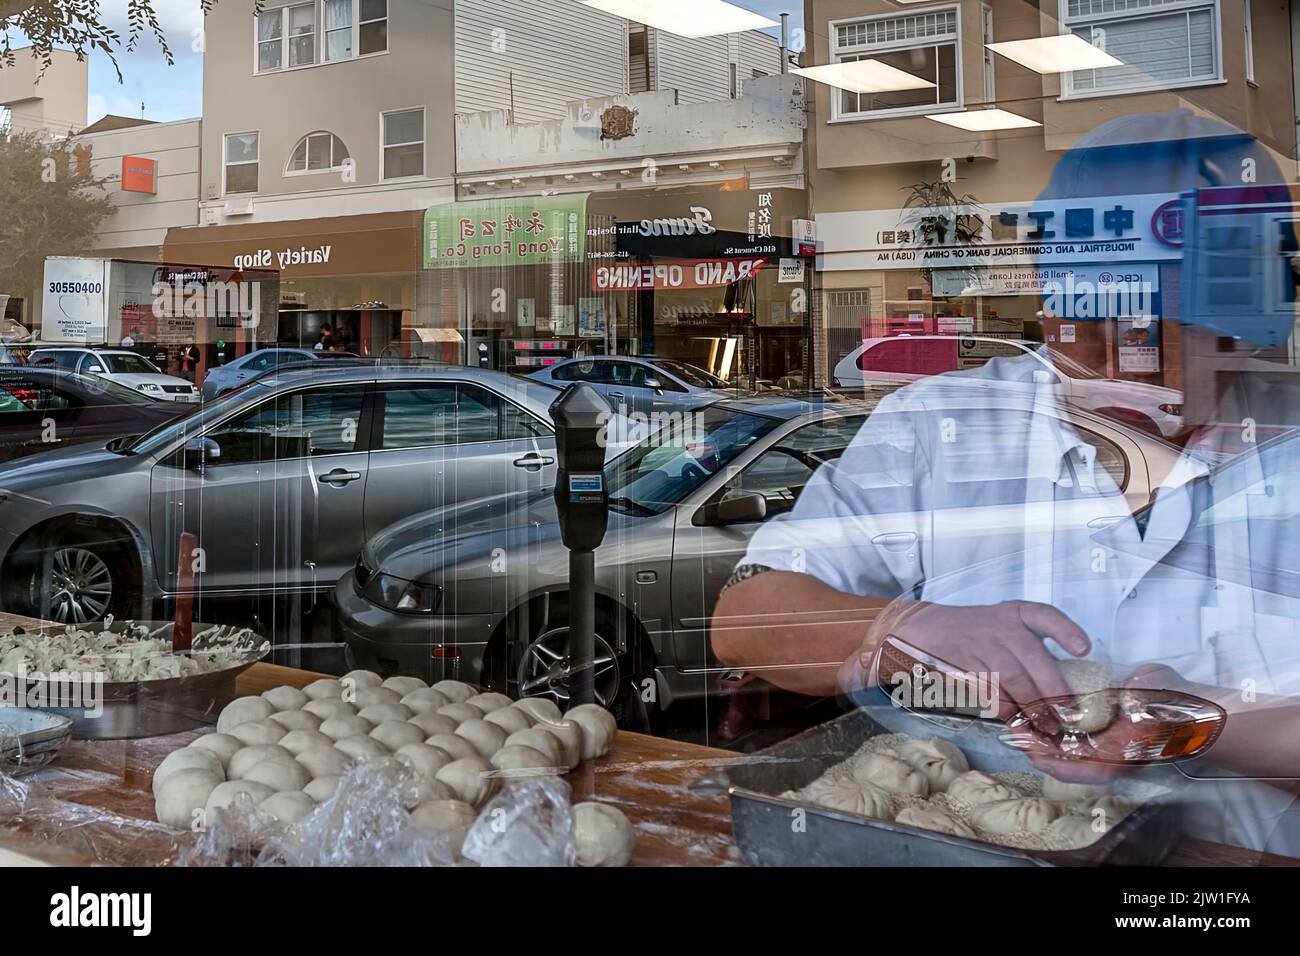 A baker works in his store window with reflections of the street and diagonal parking of the cars and other stores across the street. Stock Photo